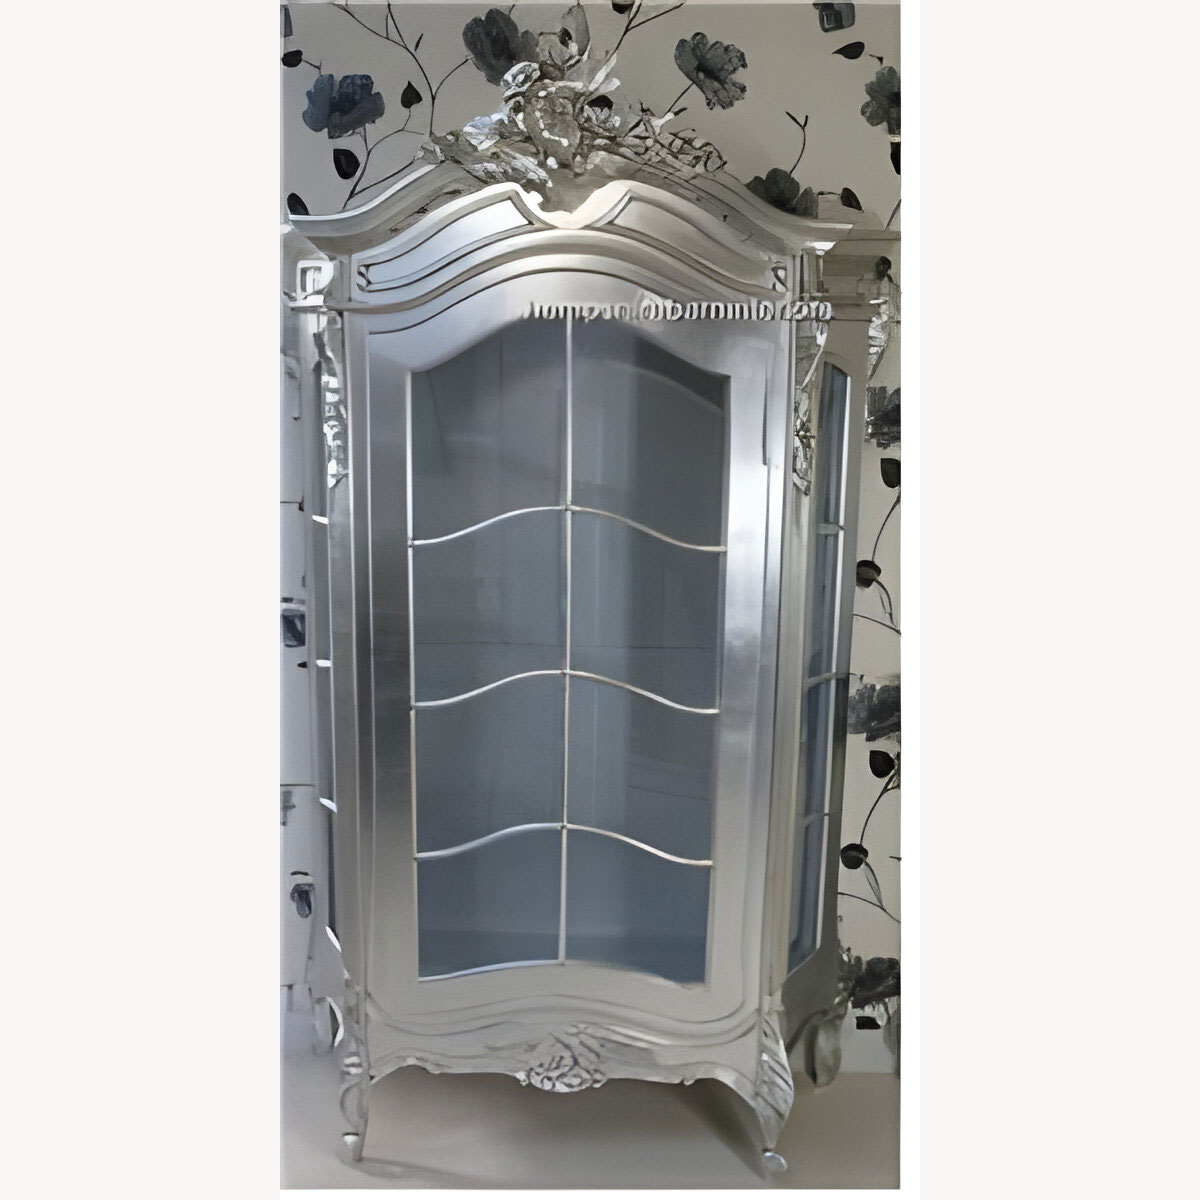 Ornate French Louis Style Carved Silver Leaf Display Cabinet Also In Antiqued Gold Leaf 1 - Hampshire Barn Interiors - Ornate French Louis Style Carved Silver Leaf Display Cabinet Also In Antiqued Gold Leaf -